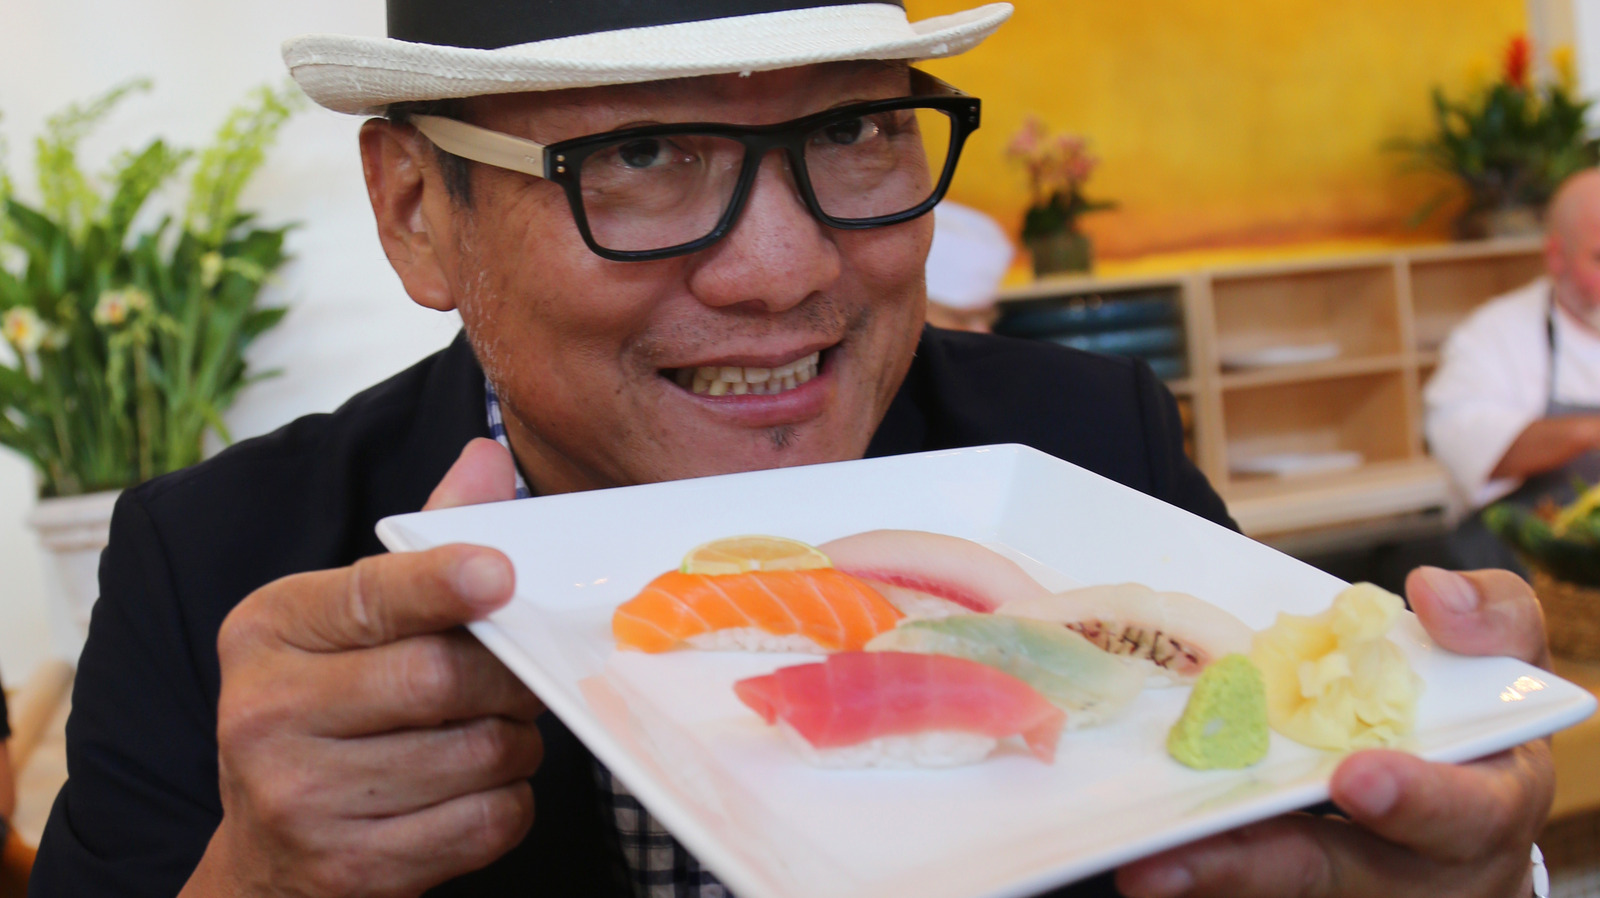 https://www.mashed.com/img/gallery/masaharu-morimoto-once-worked-at-this-famous-sushi-restaurant/l-intro-1621349556.jpg